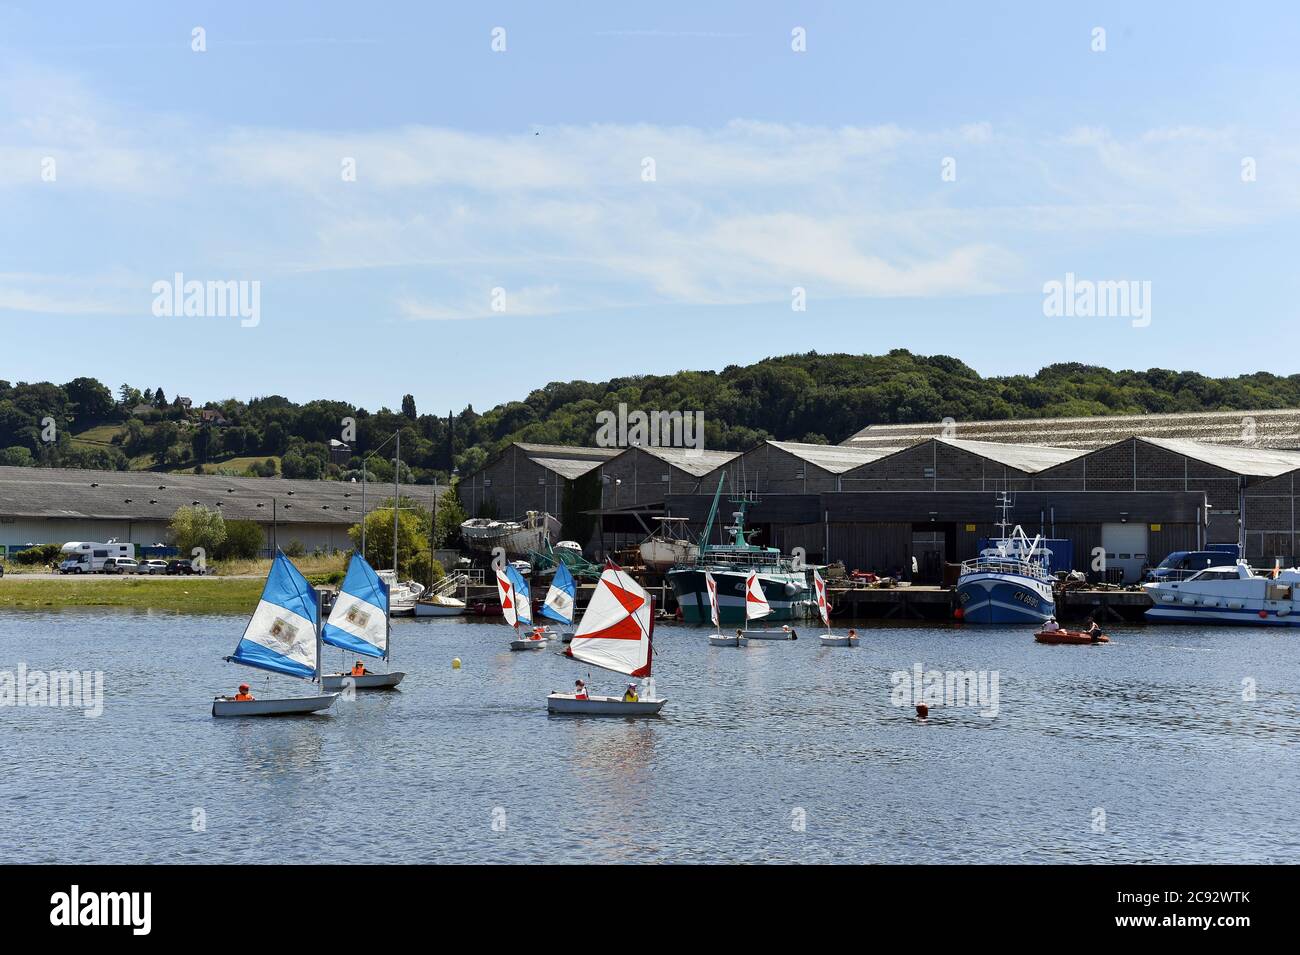 Optimist boats race in Honfleur - Normandy - France Stock Photo